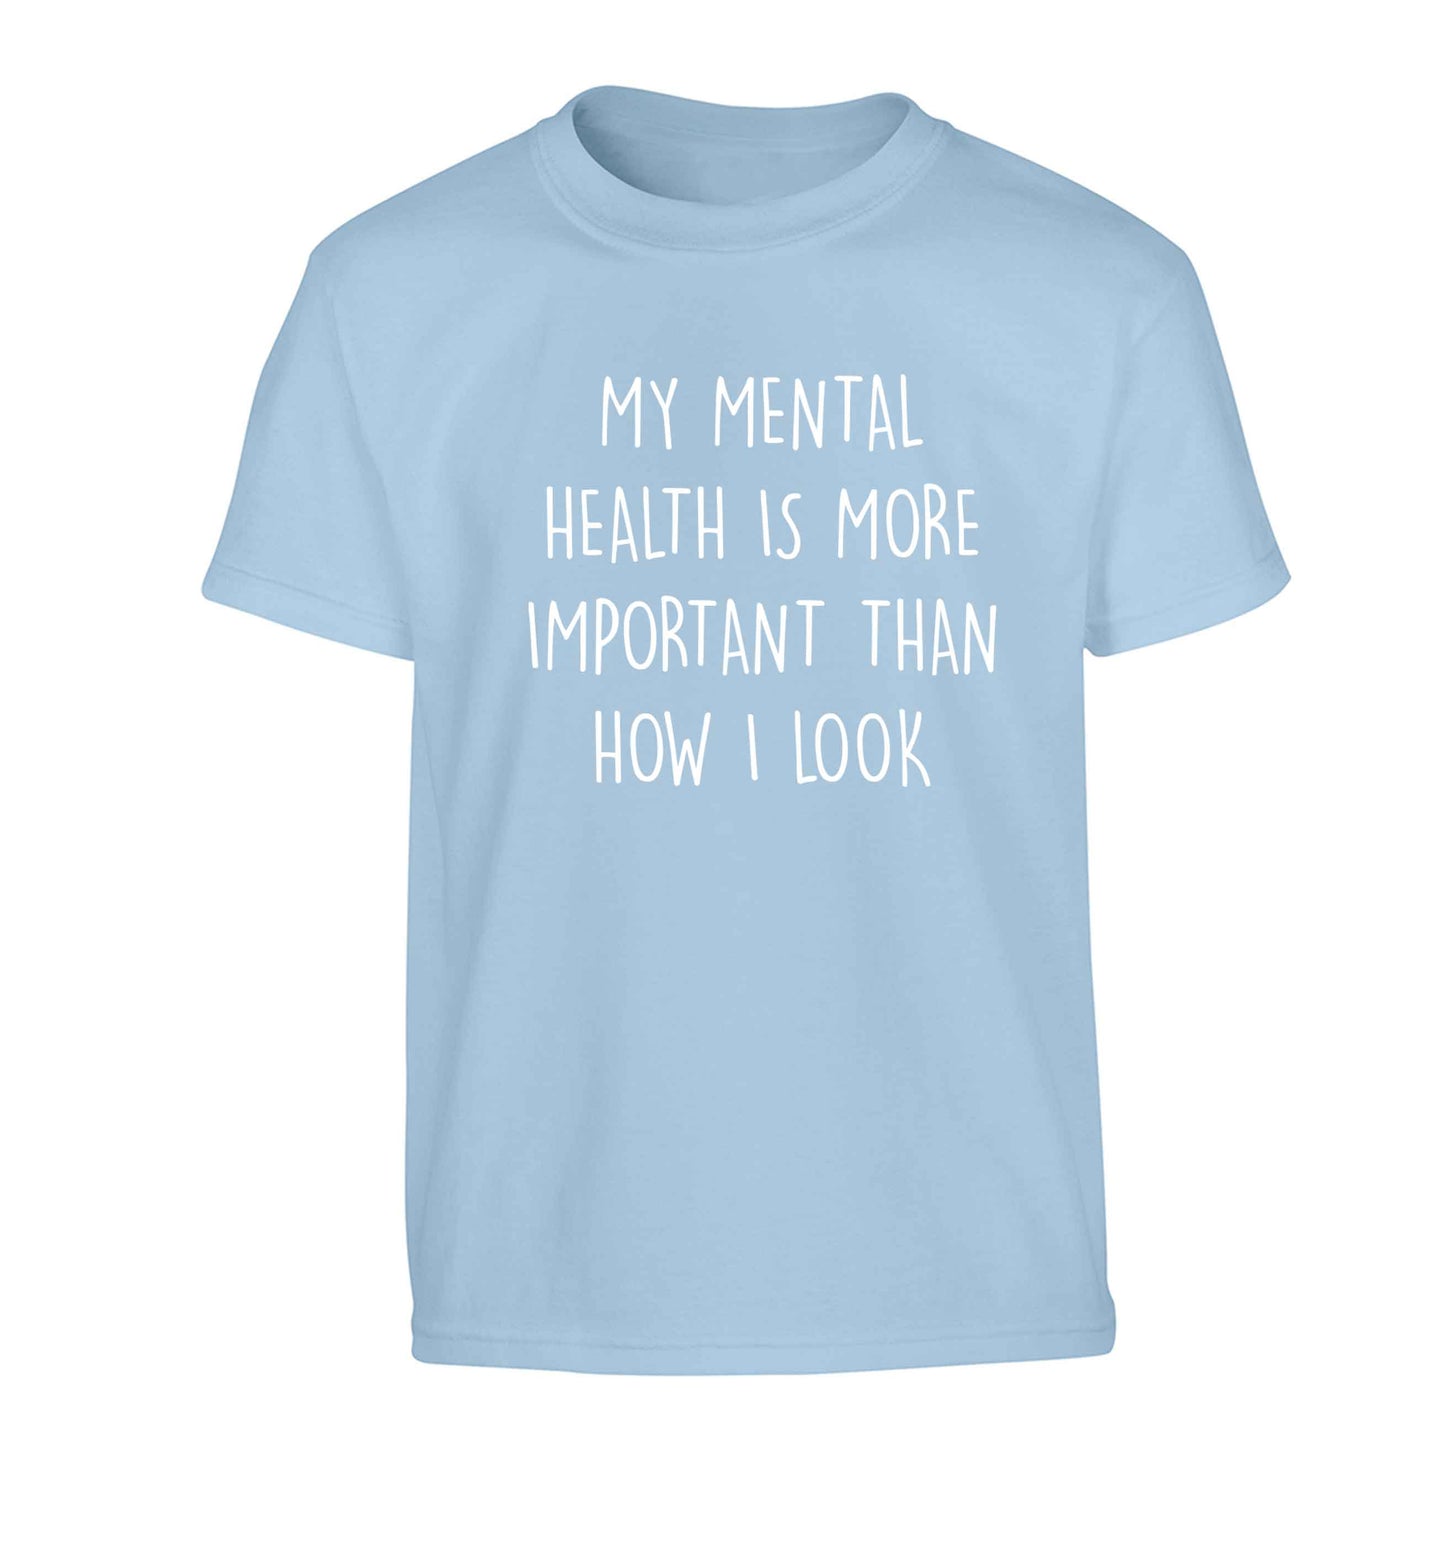 My mental health is more importnat than how I look Children's light blue Tshirt 12-13 Years